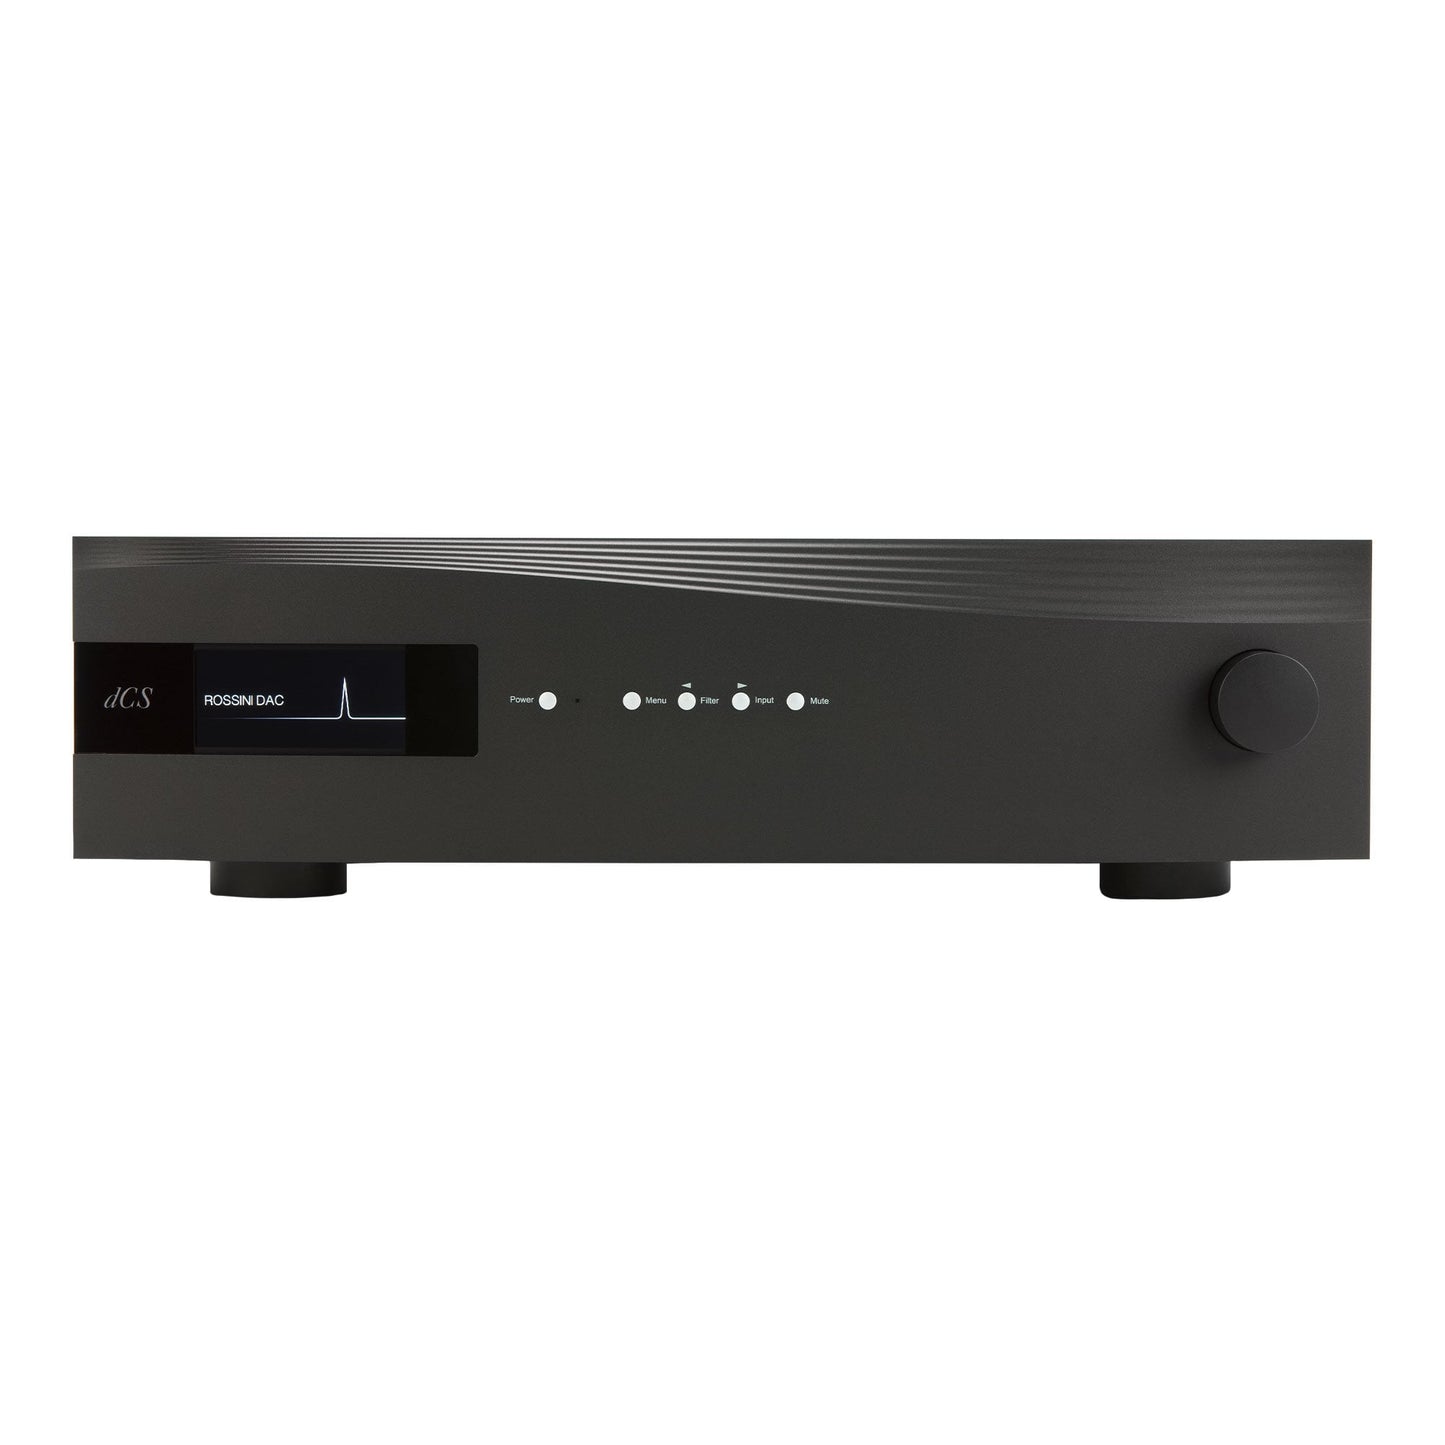 Combining robust engineering with an elegant aesthetic, the Rossini is built to withstand even the most intensive use and deliver a truly immersive sound at all levels and outputs. With its flexible, future-proof design, it’s a system that can grow and evolve, delivering a state-of-the-art listening experience for years to come.